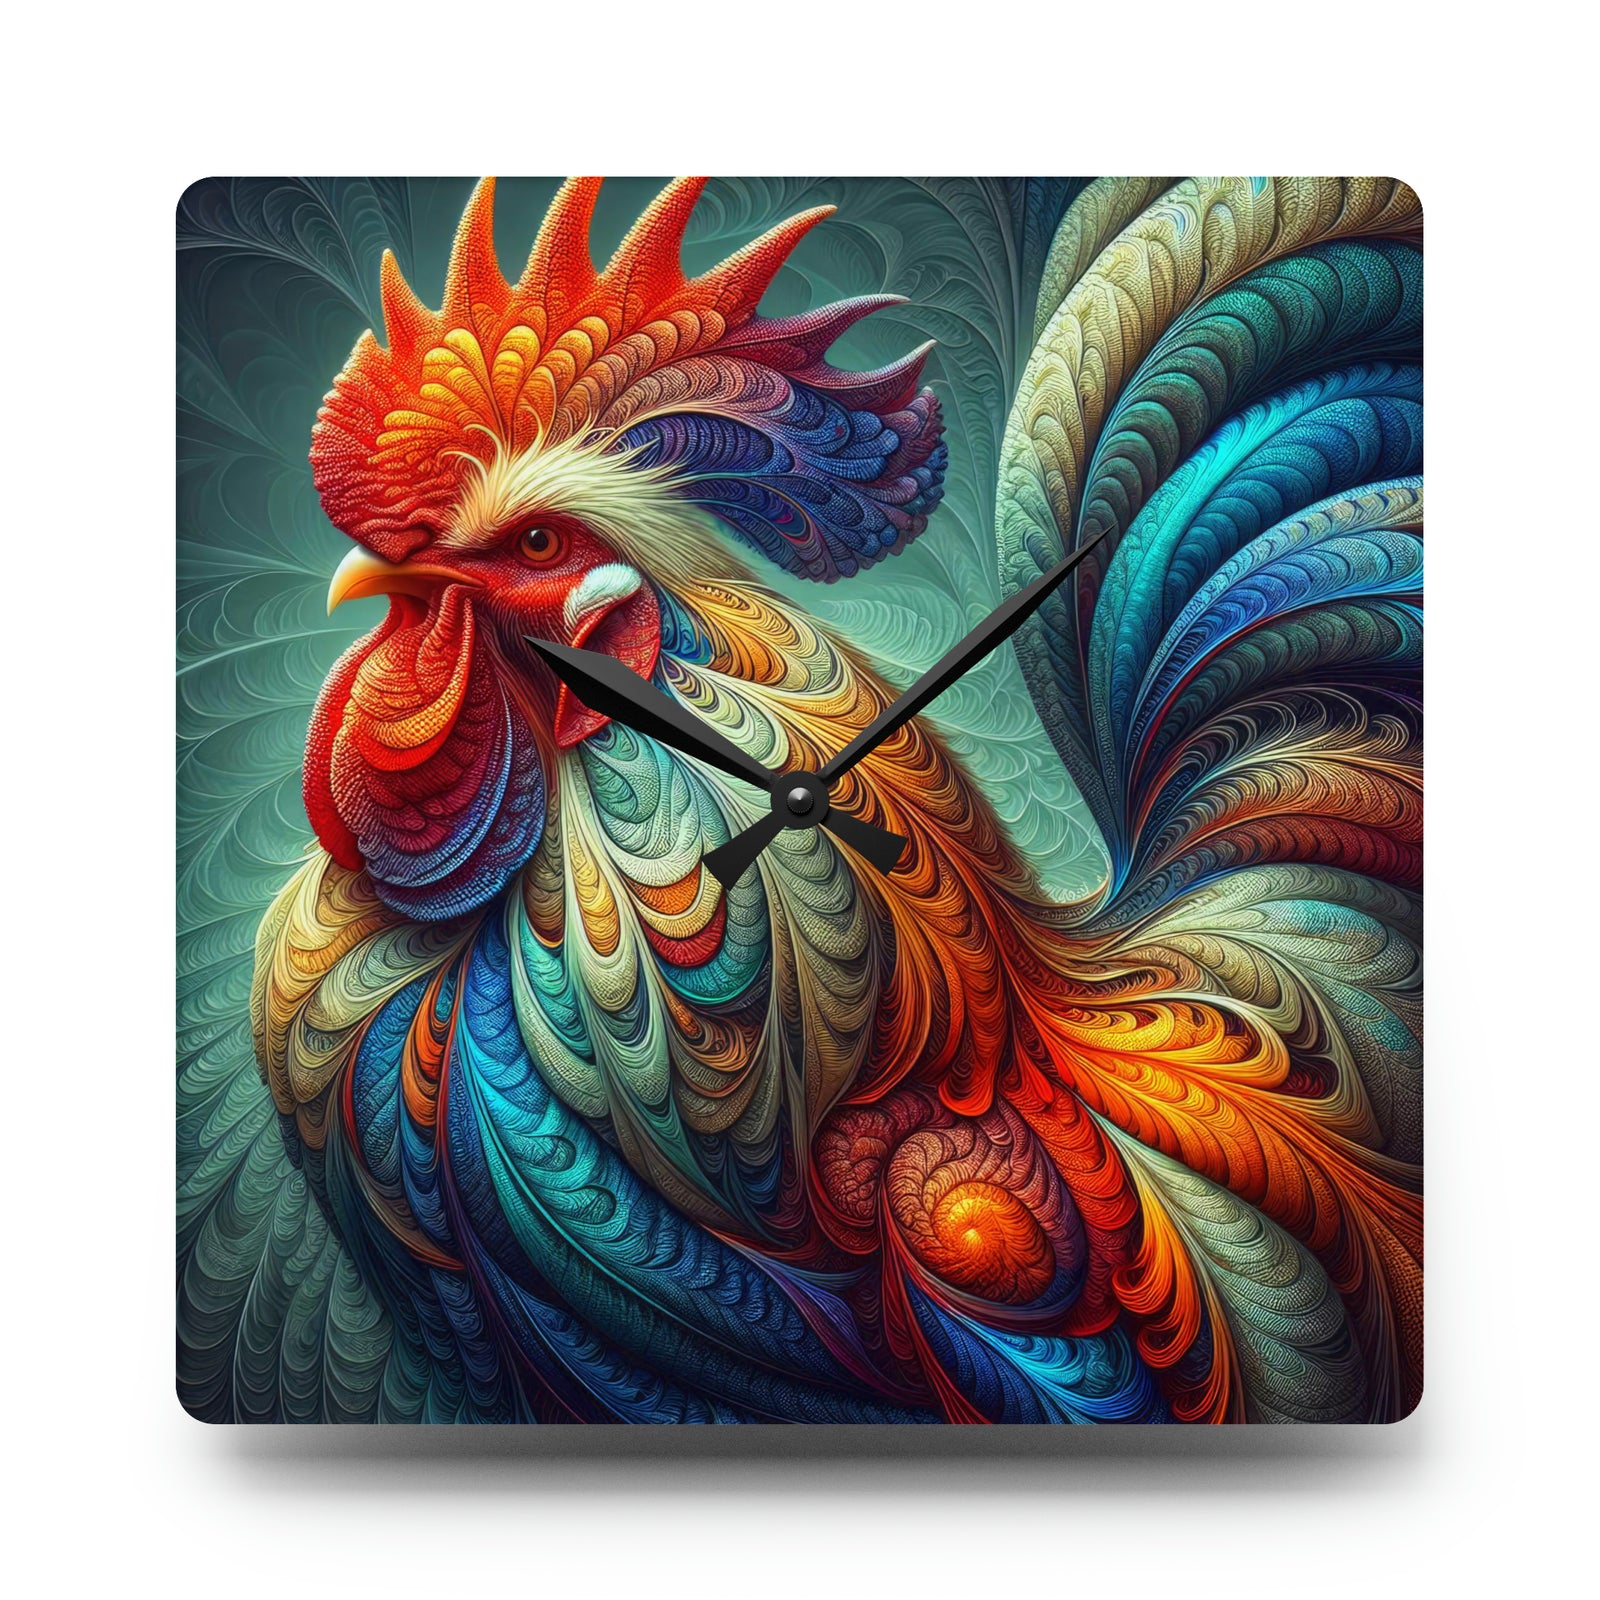 The Regal Acanthus Rooster Acrylic Wall Clock